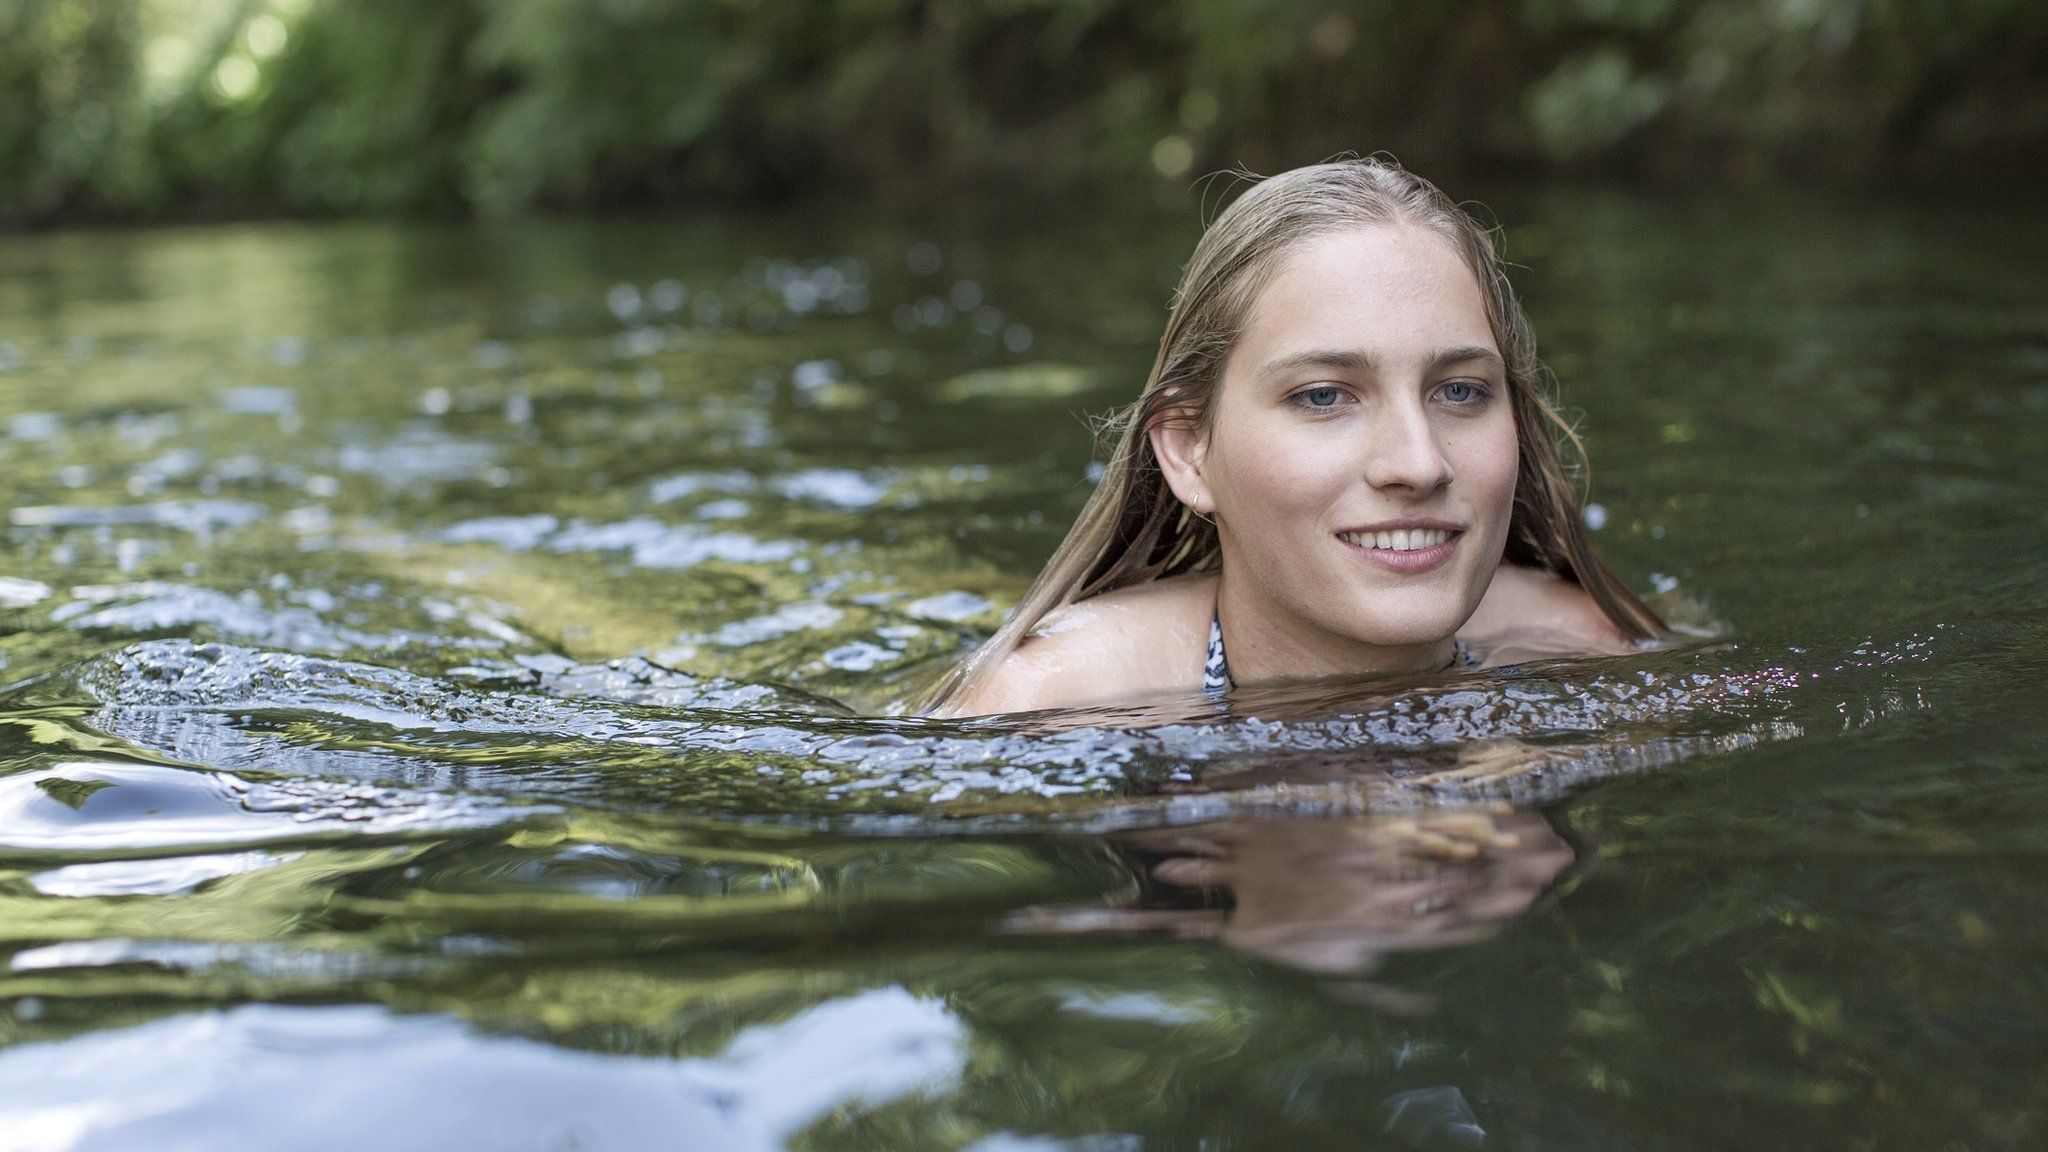 Woman wild swimming in a river